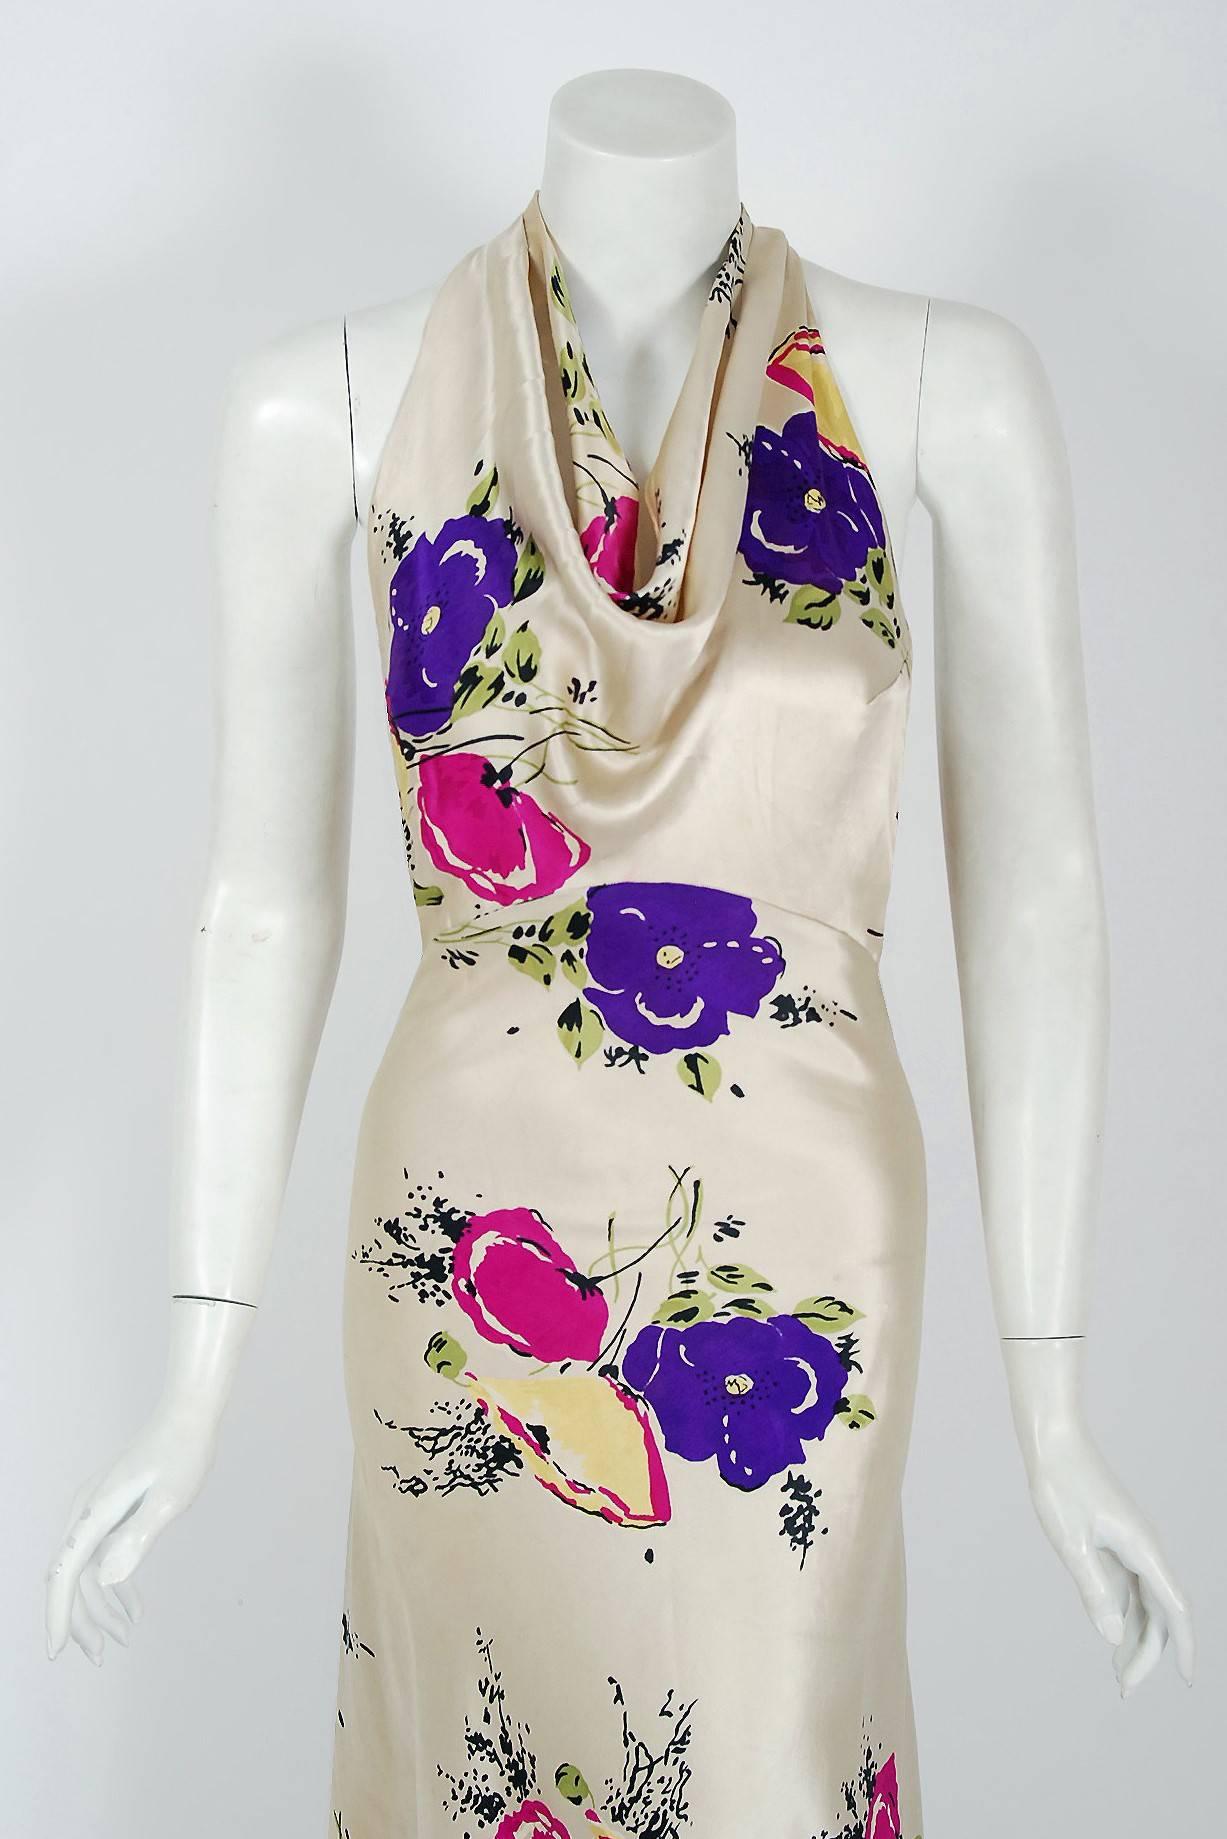 A rare luxurious floral-garden print silk satin gown from the "Old Hollywood" era of glamour. The bodice is an ultra chic cowl-neck with stylized cut-out twist backside. The waist is nipped with a tailored back belt. The lower skirt is